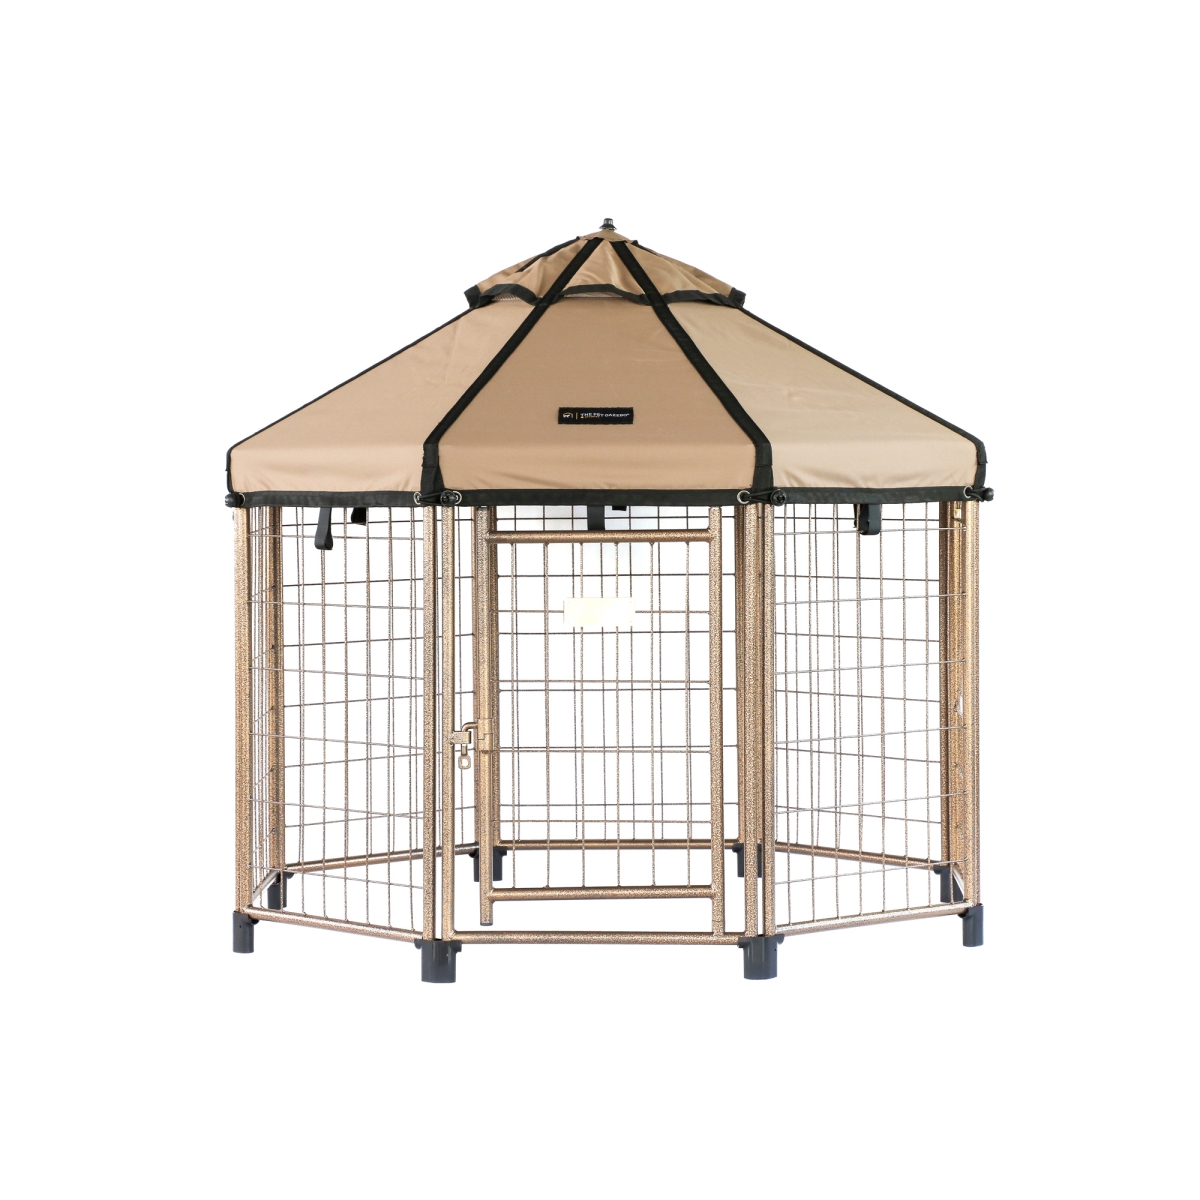 Picture of Pet Gazebo 23404ET 4 ft. Pet Gazebo with Earth Taupe Canopy